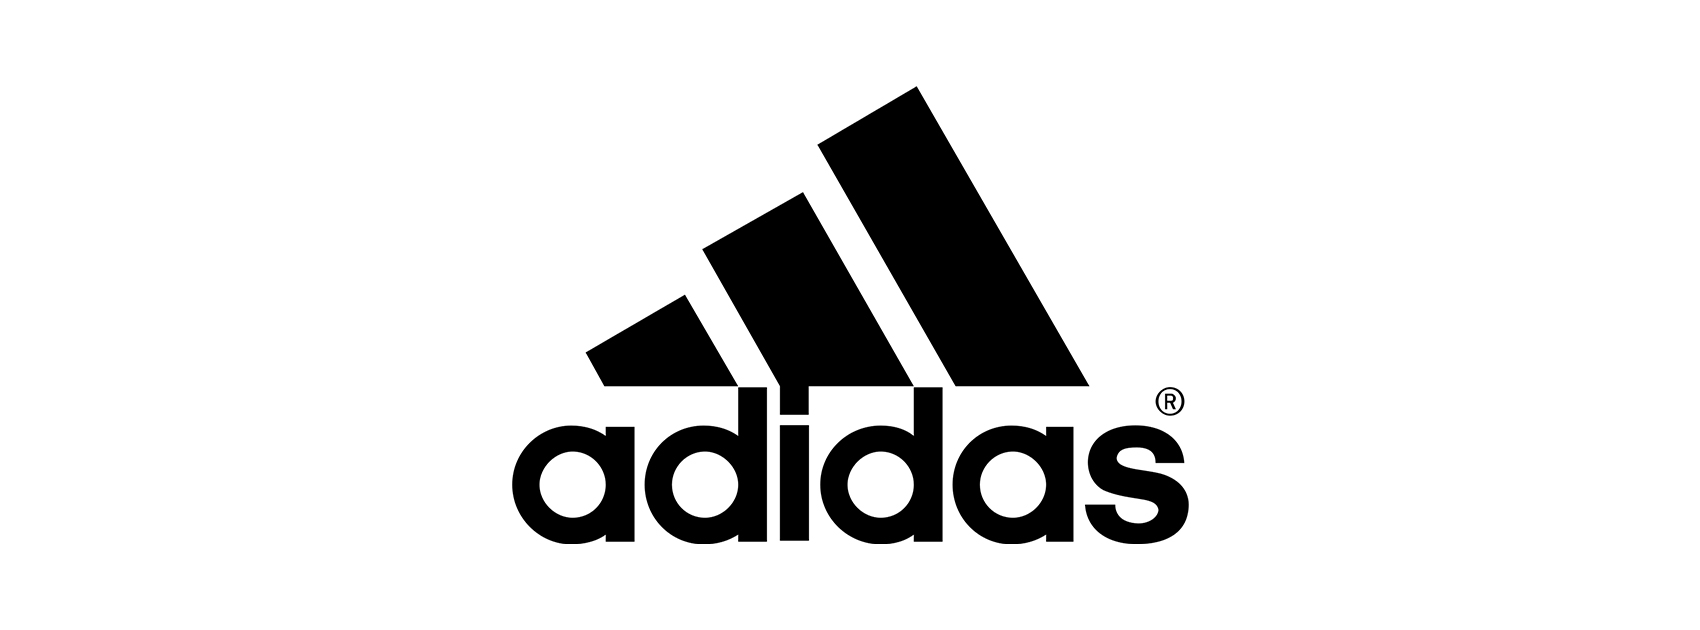 fun facts about adidas